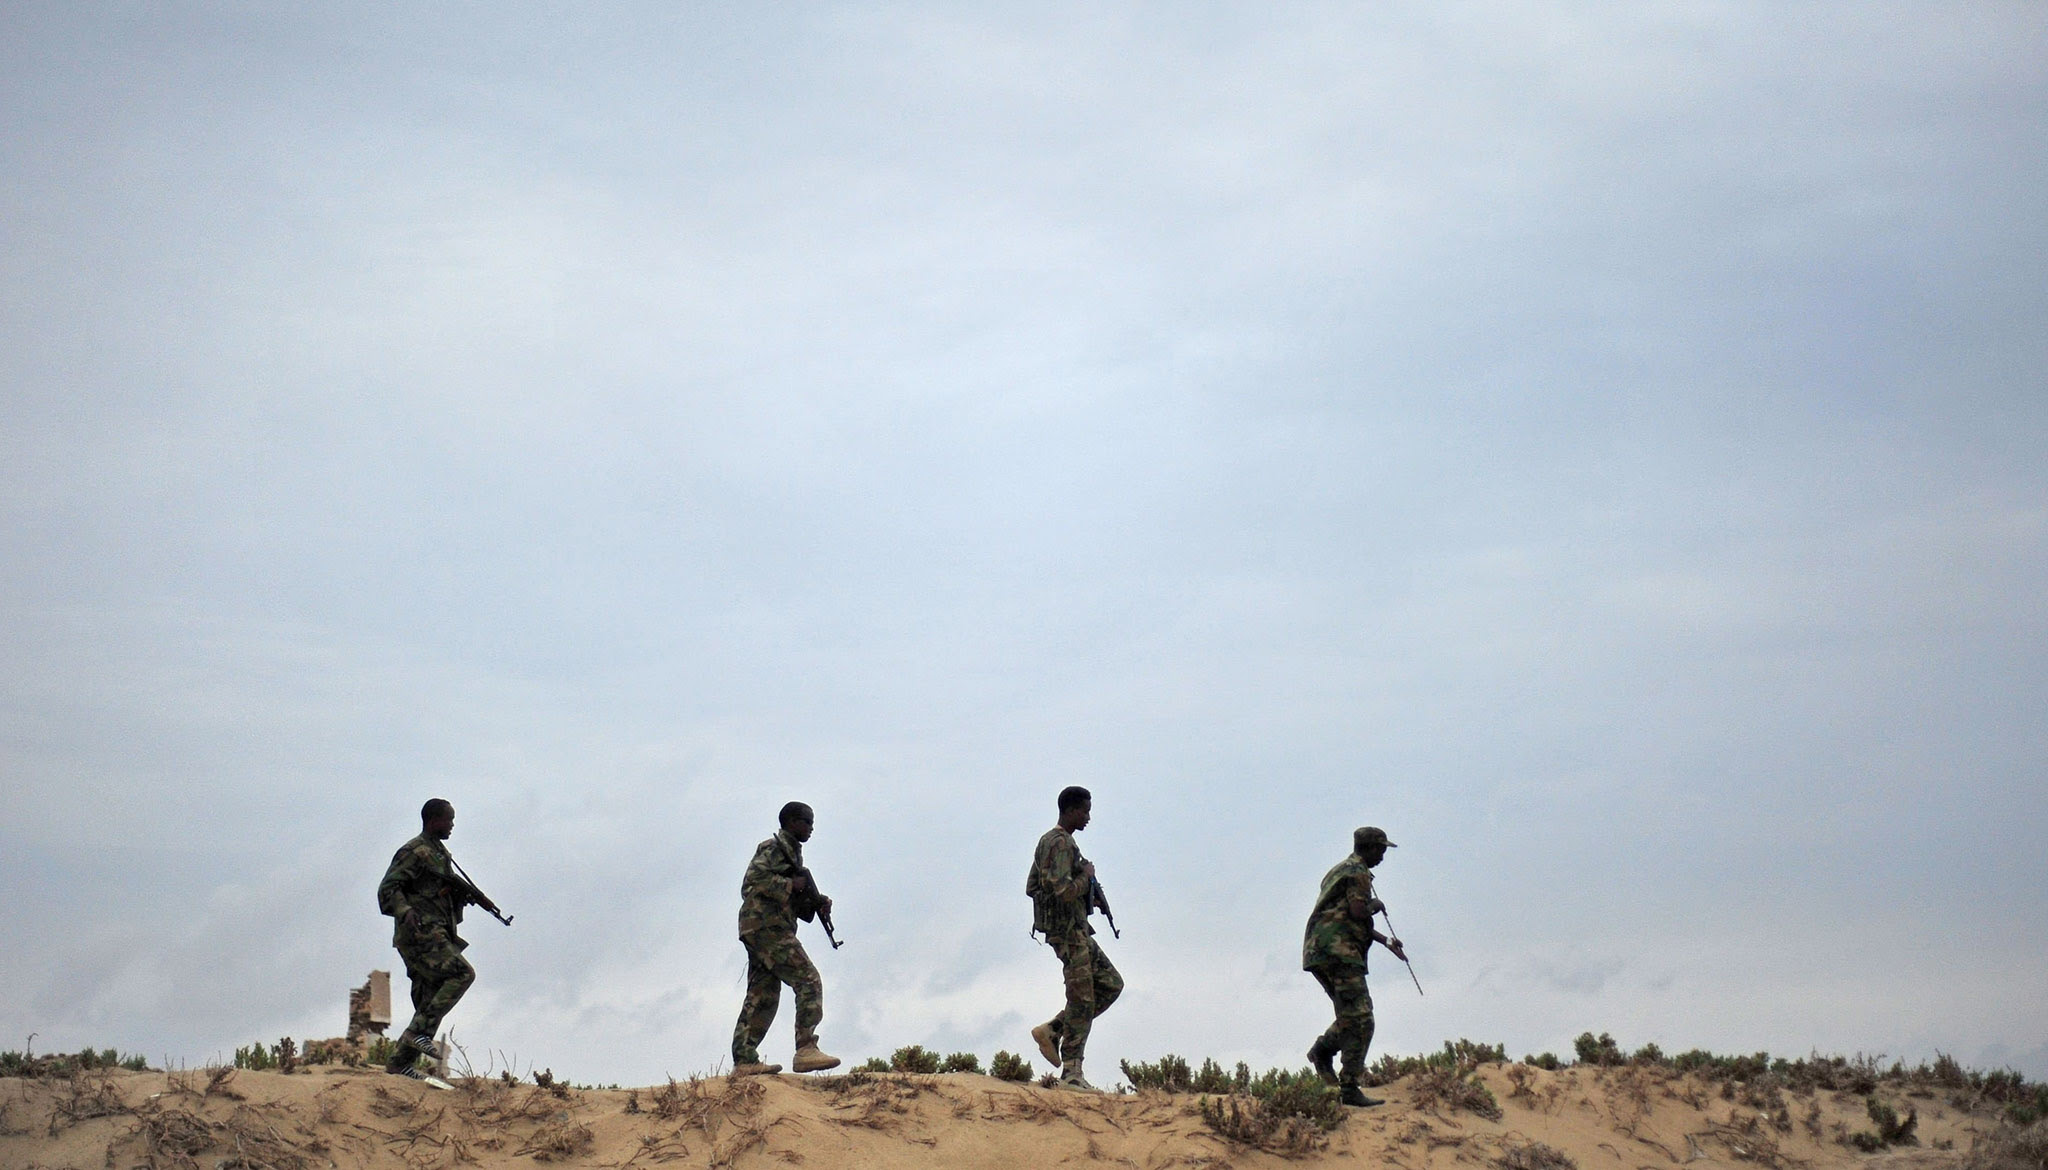 Somali security forces patrol along the coast of Qaw, in Puntland, northeastern Somalia on December, 18, 2016. Armed militants groups have become more active in the Puntland's region, northern Somalia, since being pushed out of their strongholds in southern Somalia by African Union forces and the Somali National Army. / AFP PHOTO / Mohamed ABDIWAHABMOHAMED ABDIWAHAB/AFP/Getty Images